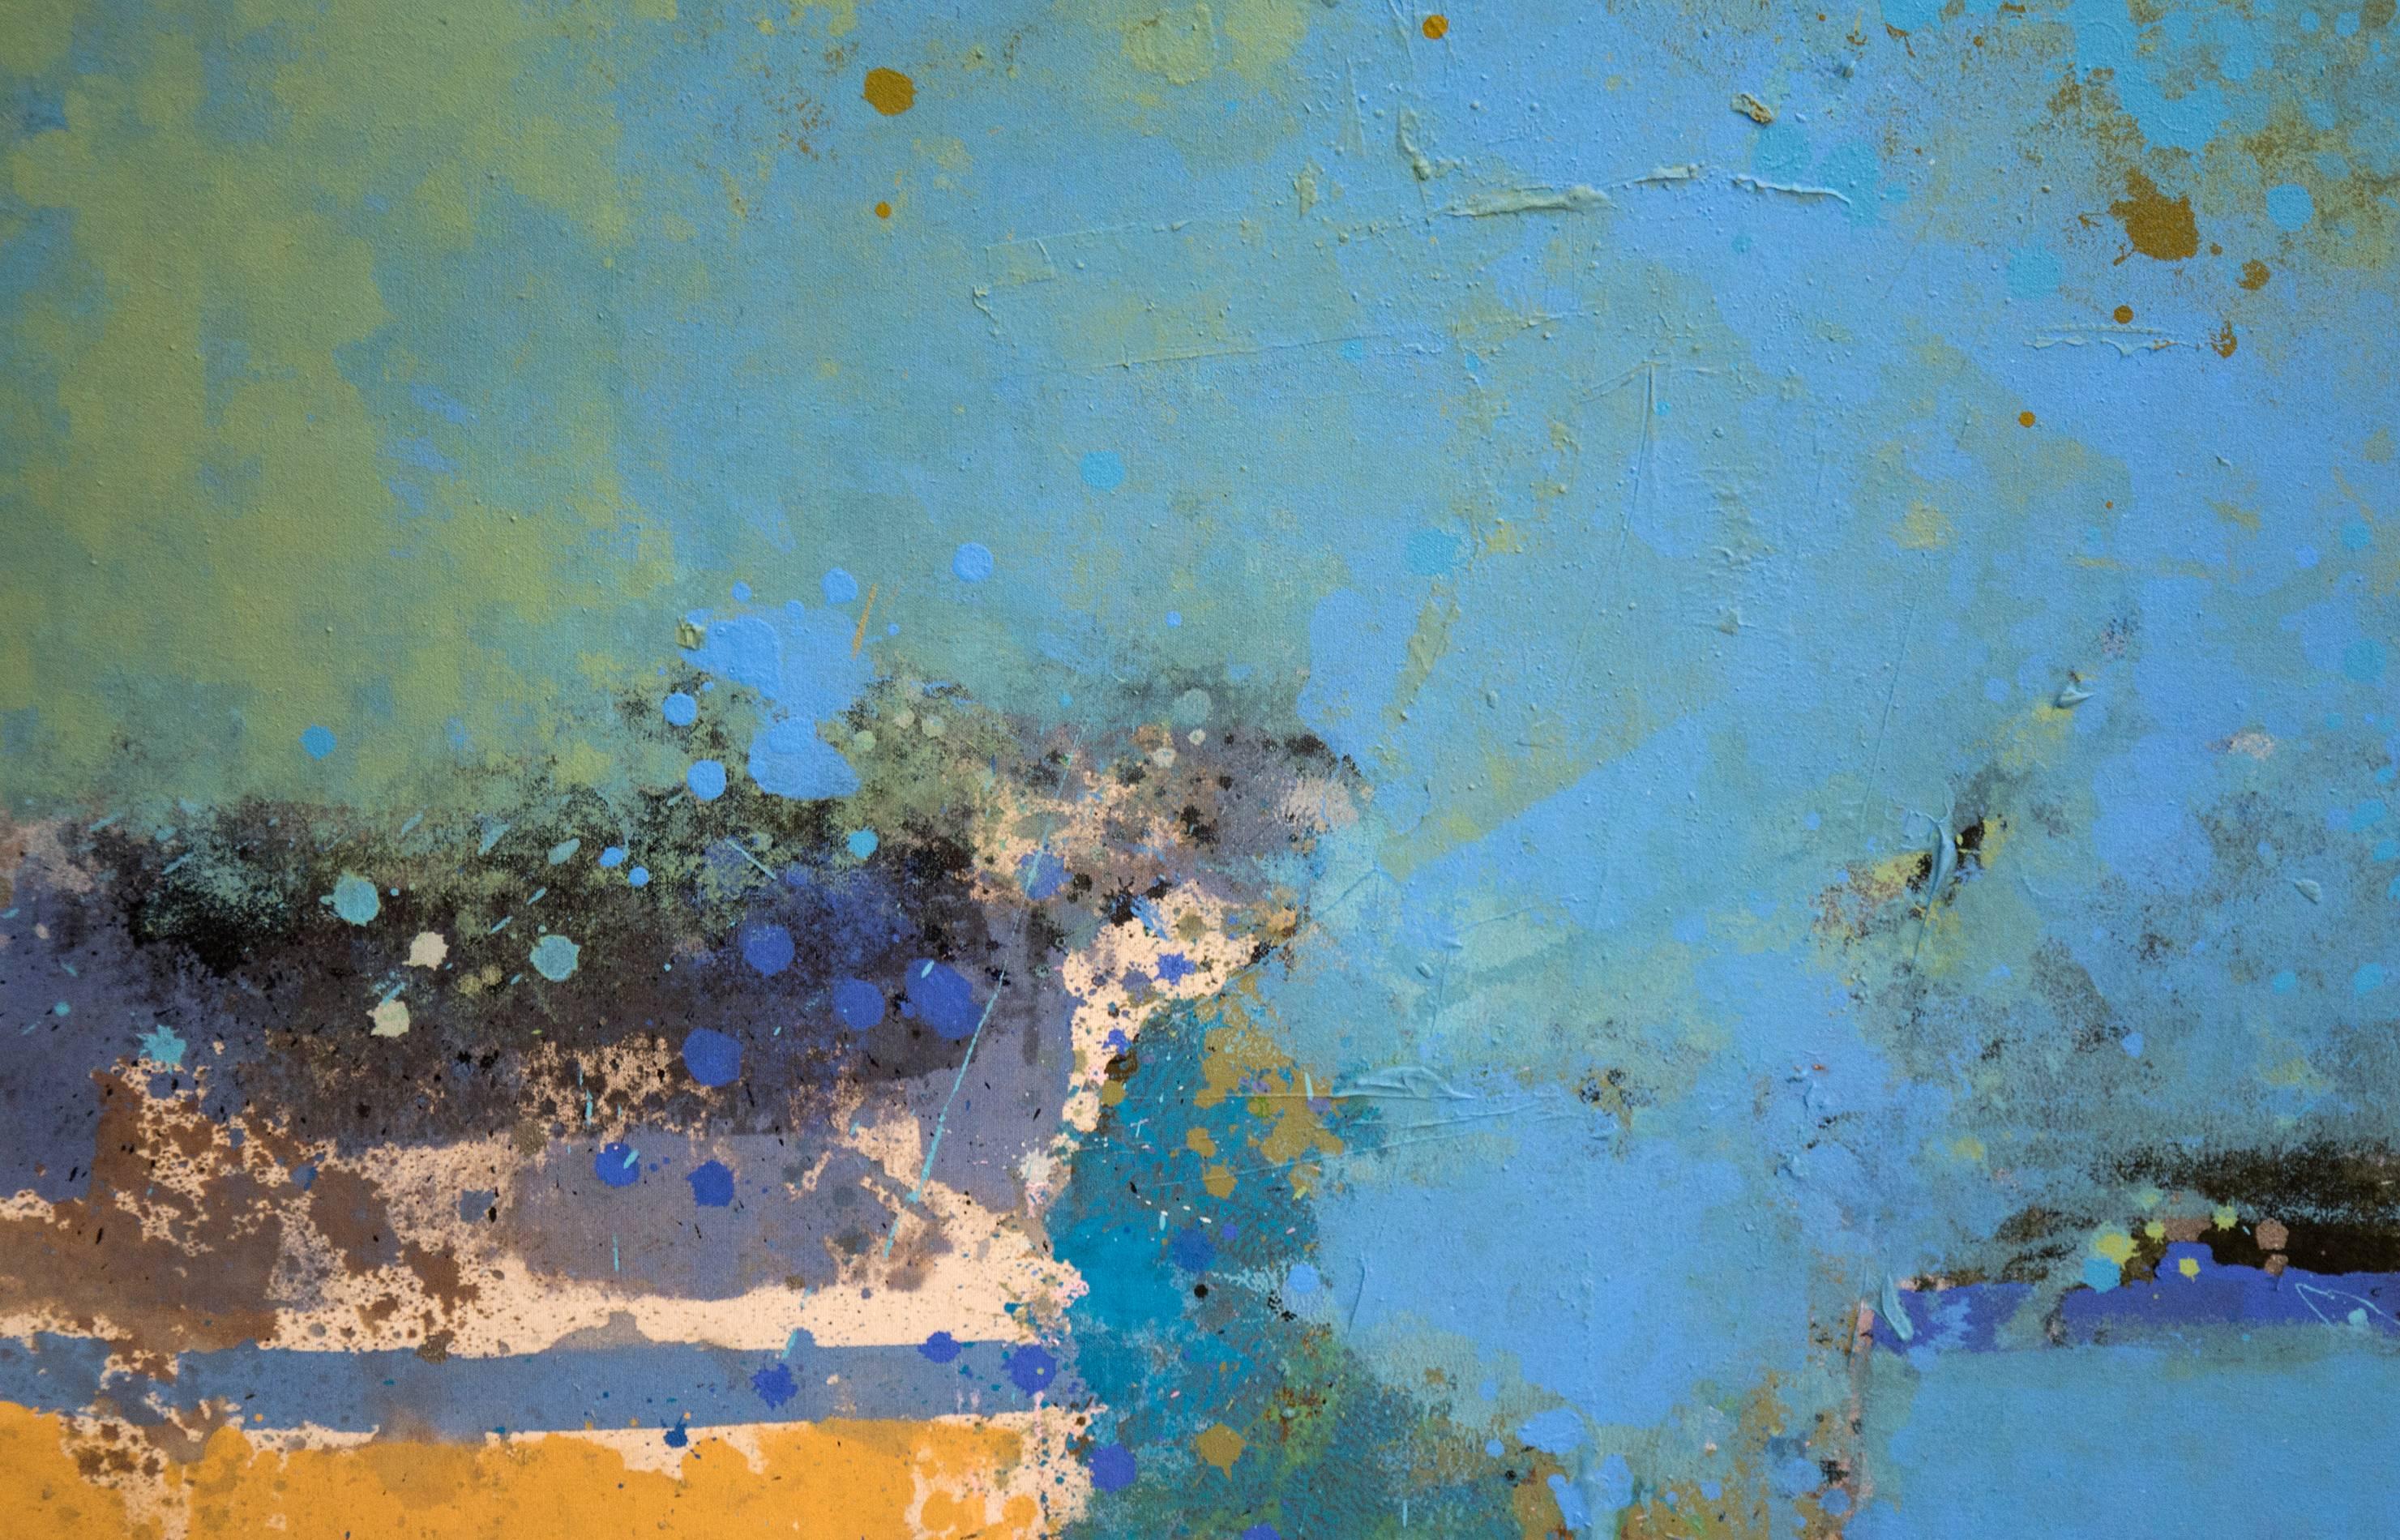 Abstraction in Blue and Burnt Sienna 2